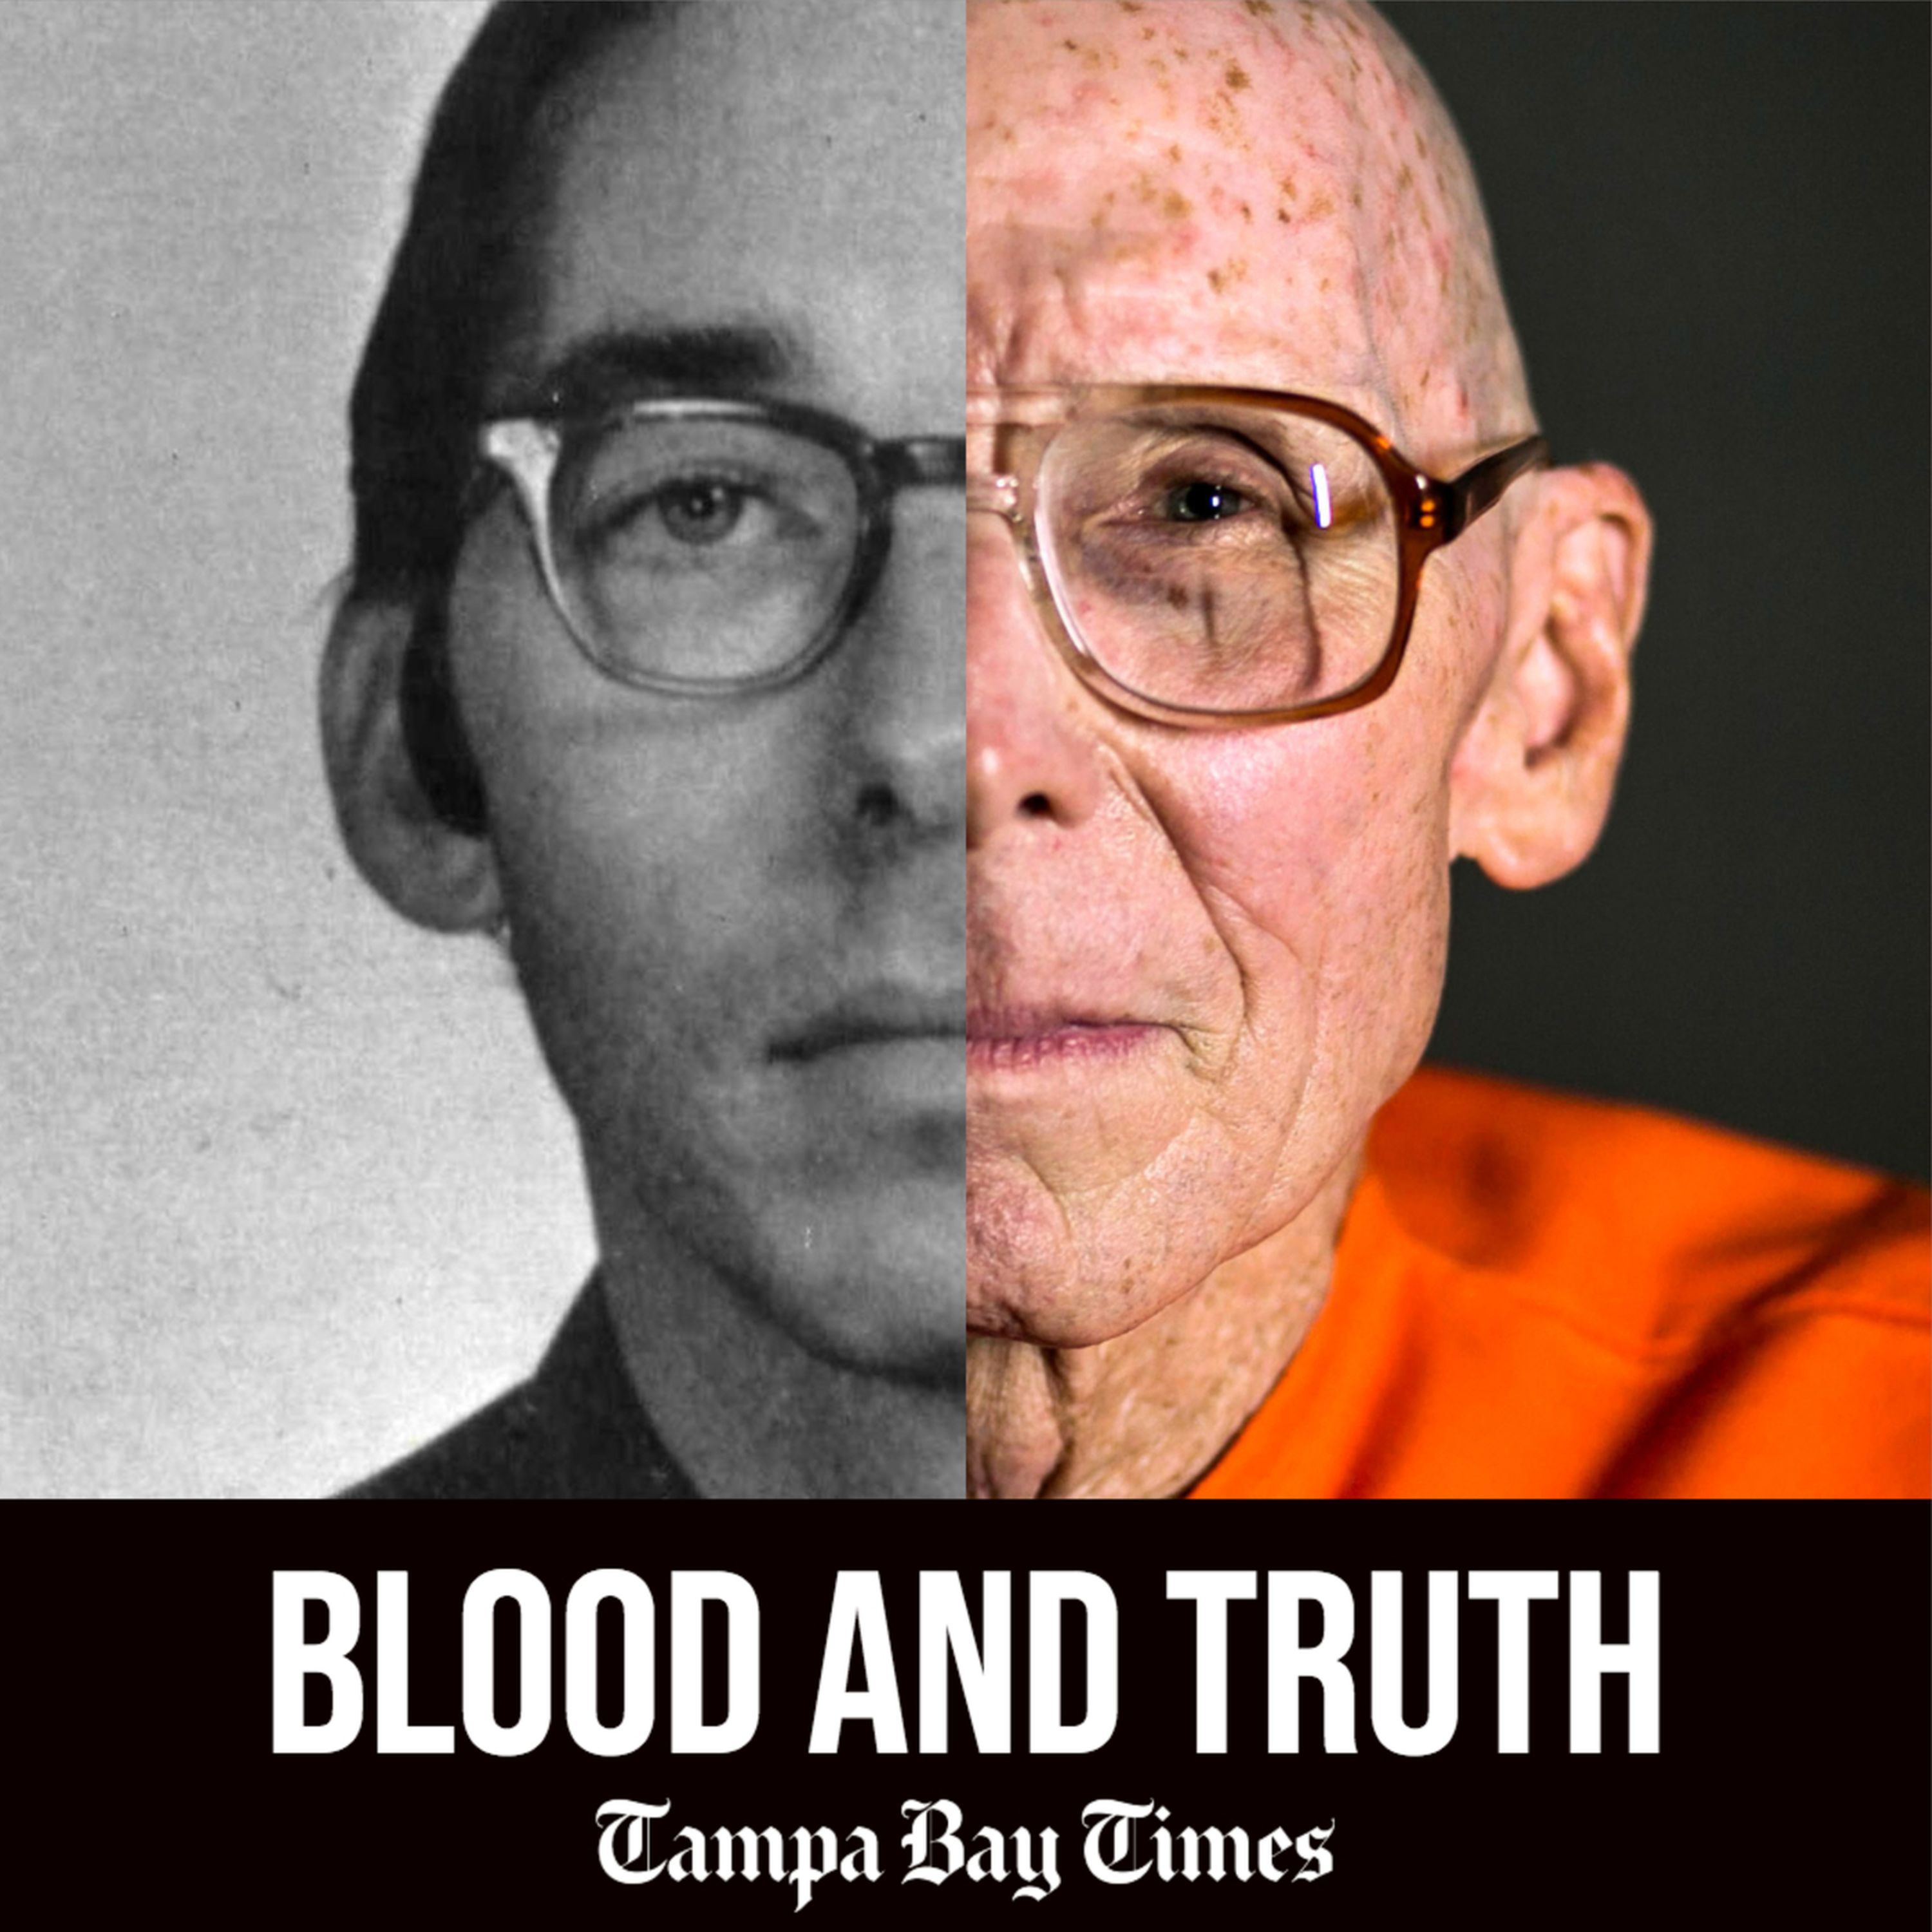 Coming soon: Blood and Truth